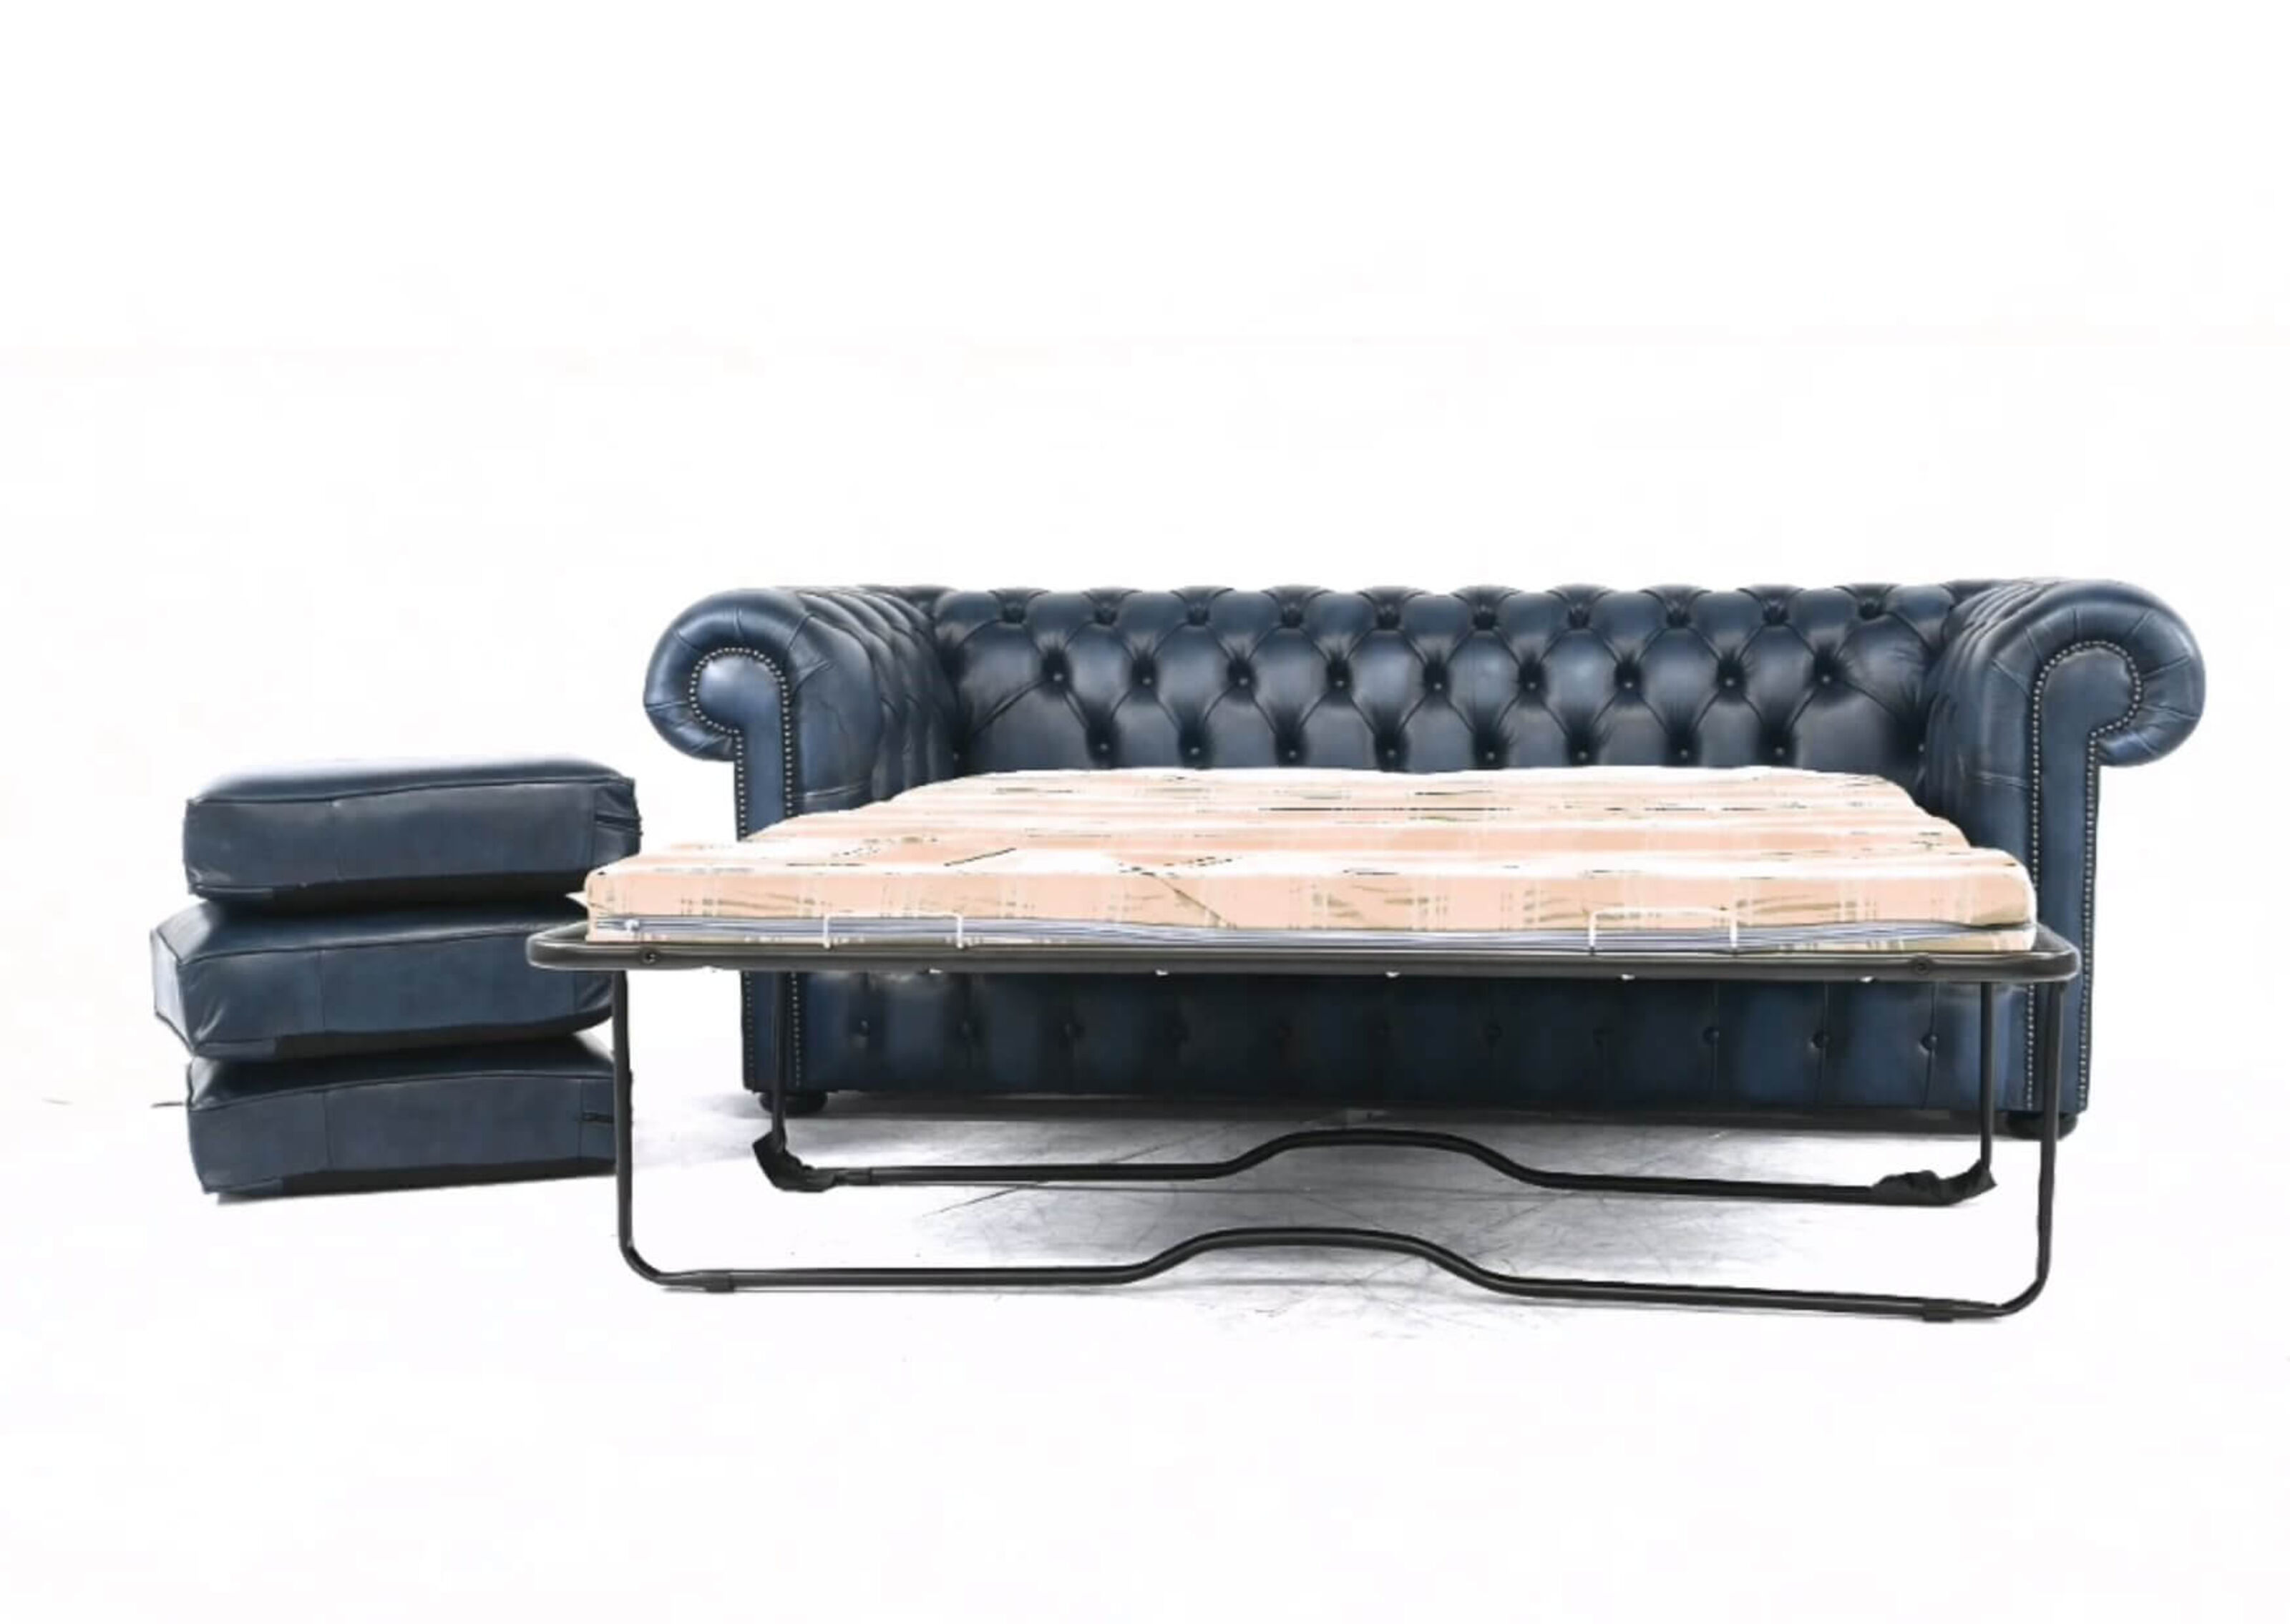 Triple the Comfort: 3-Seater Chesterfield Sofa Beds  %Post Title